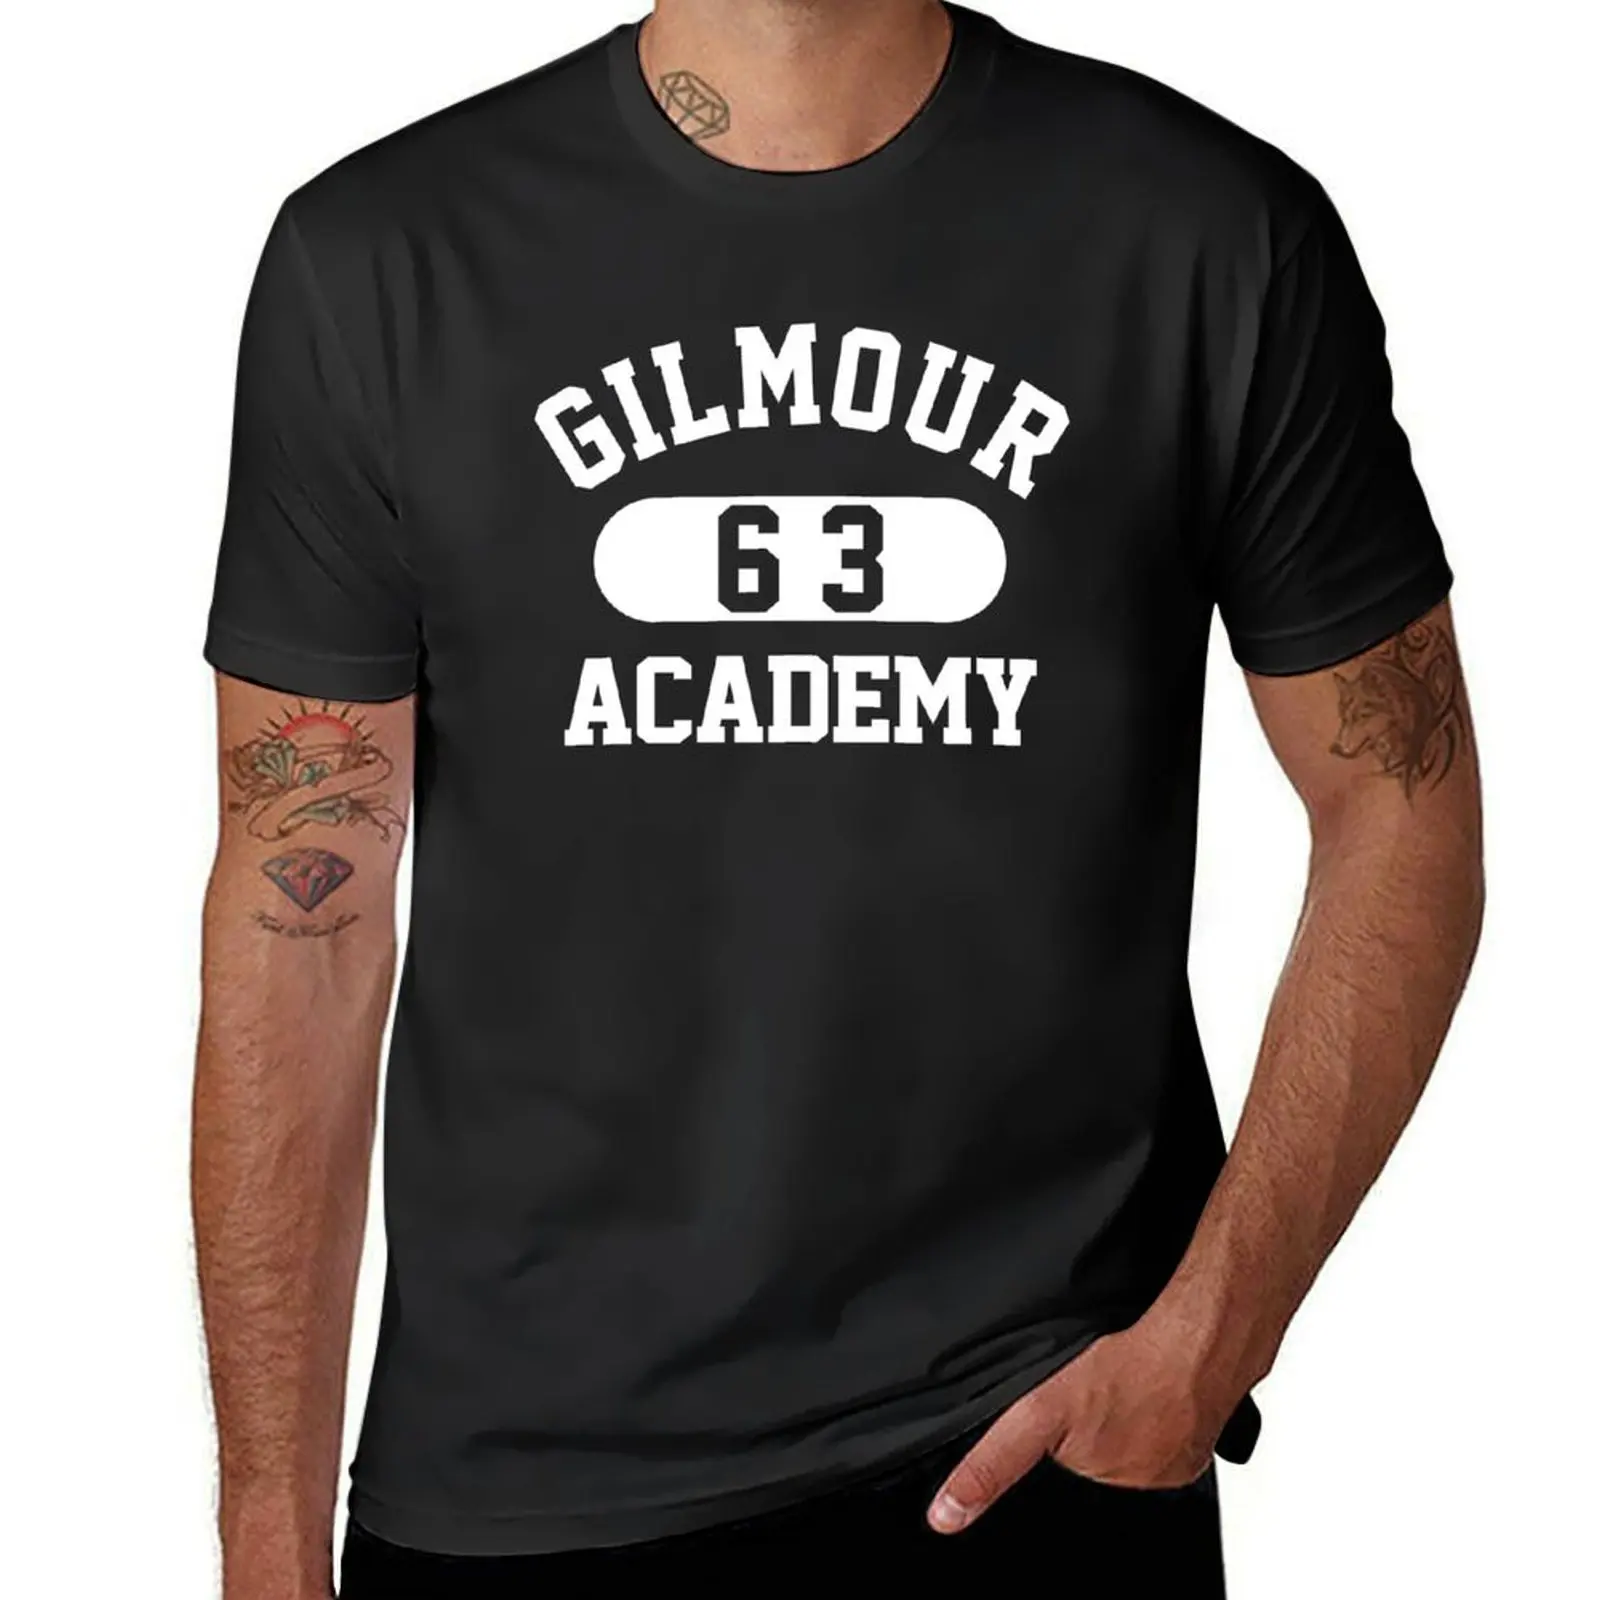 

GILMOUR ACADEMY T-Shirt customizeds aesthetic clothes mens funny t shirts